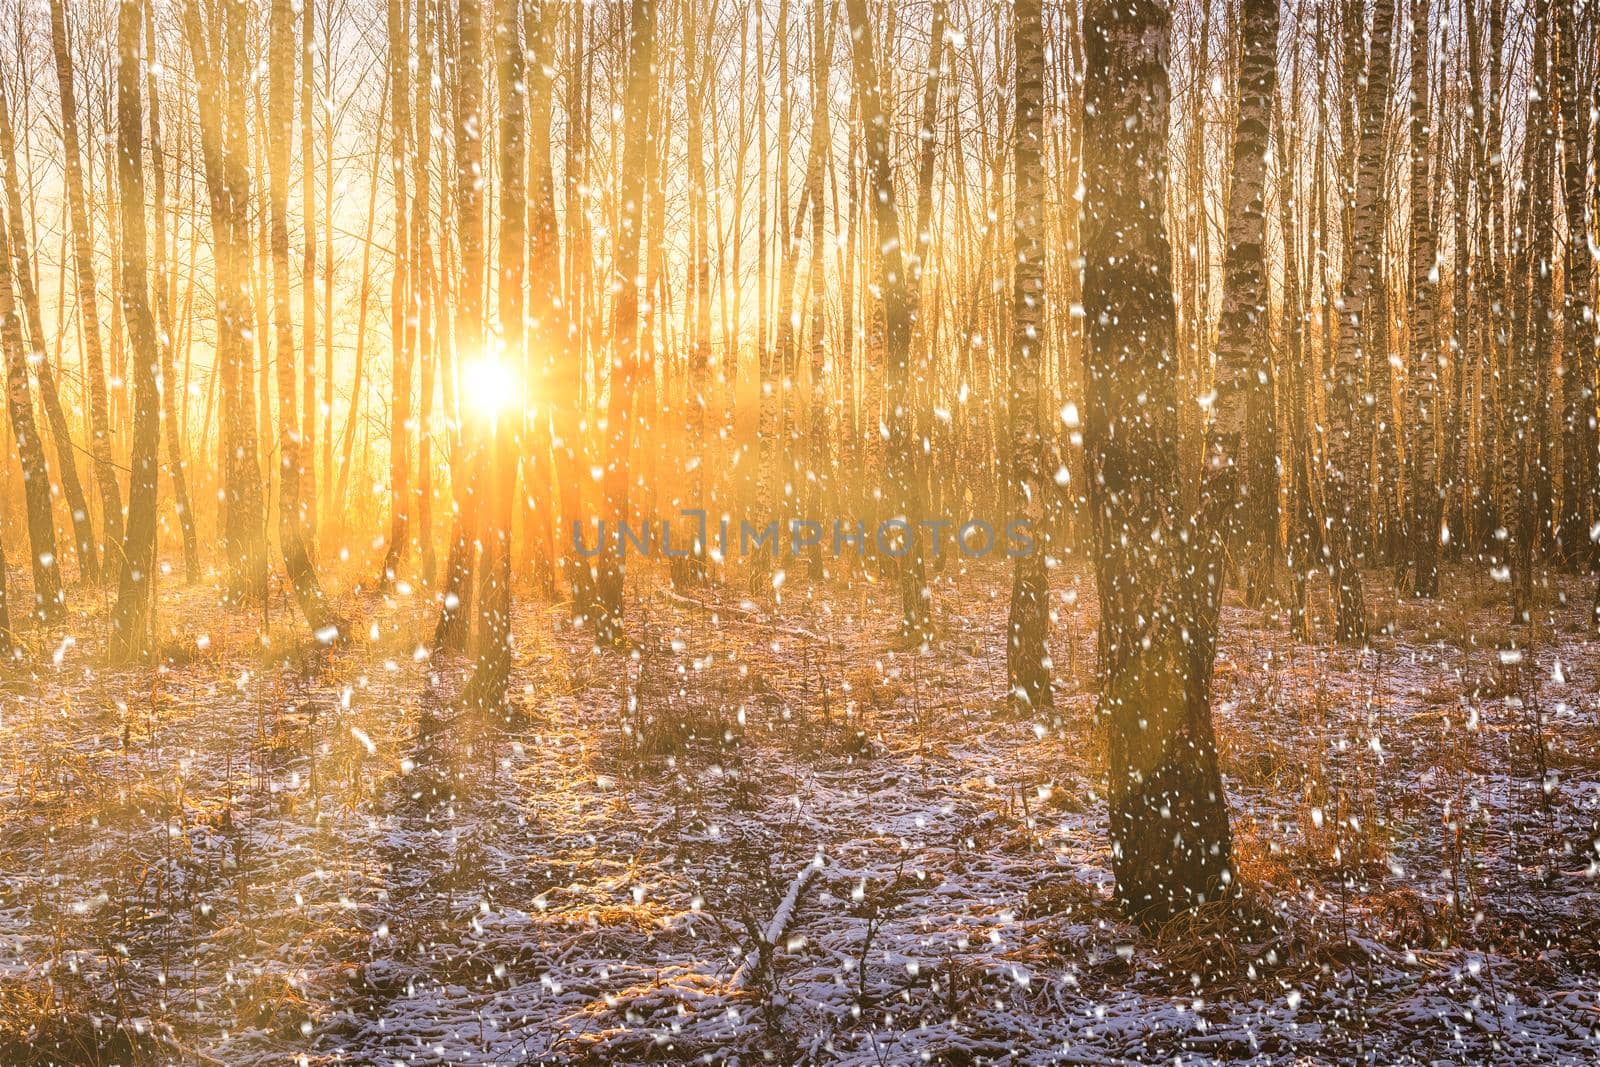 Sunset or sunrise in a birch grove with a falling snow. Rows of birch trunks with the sun's rays passing through them. Snowfall.